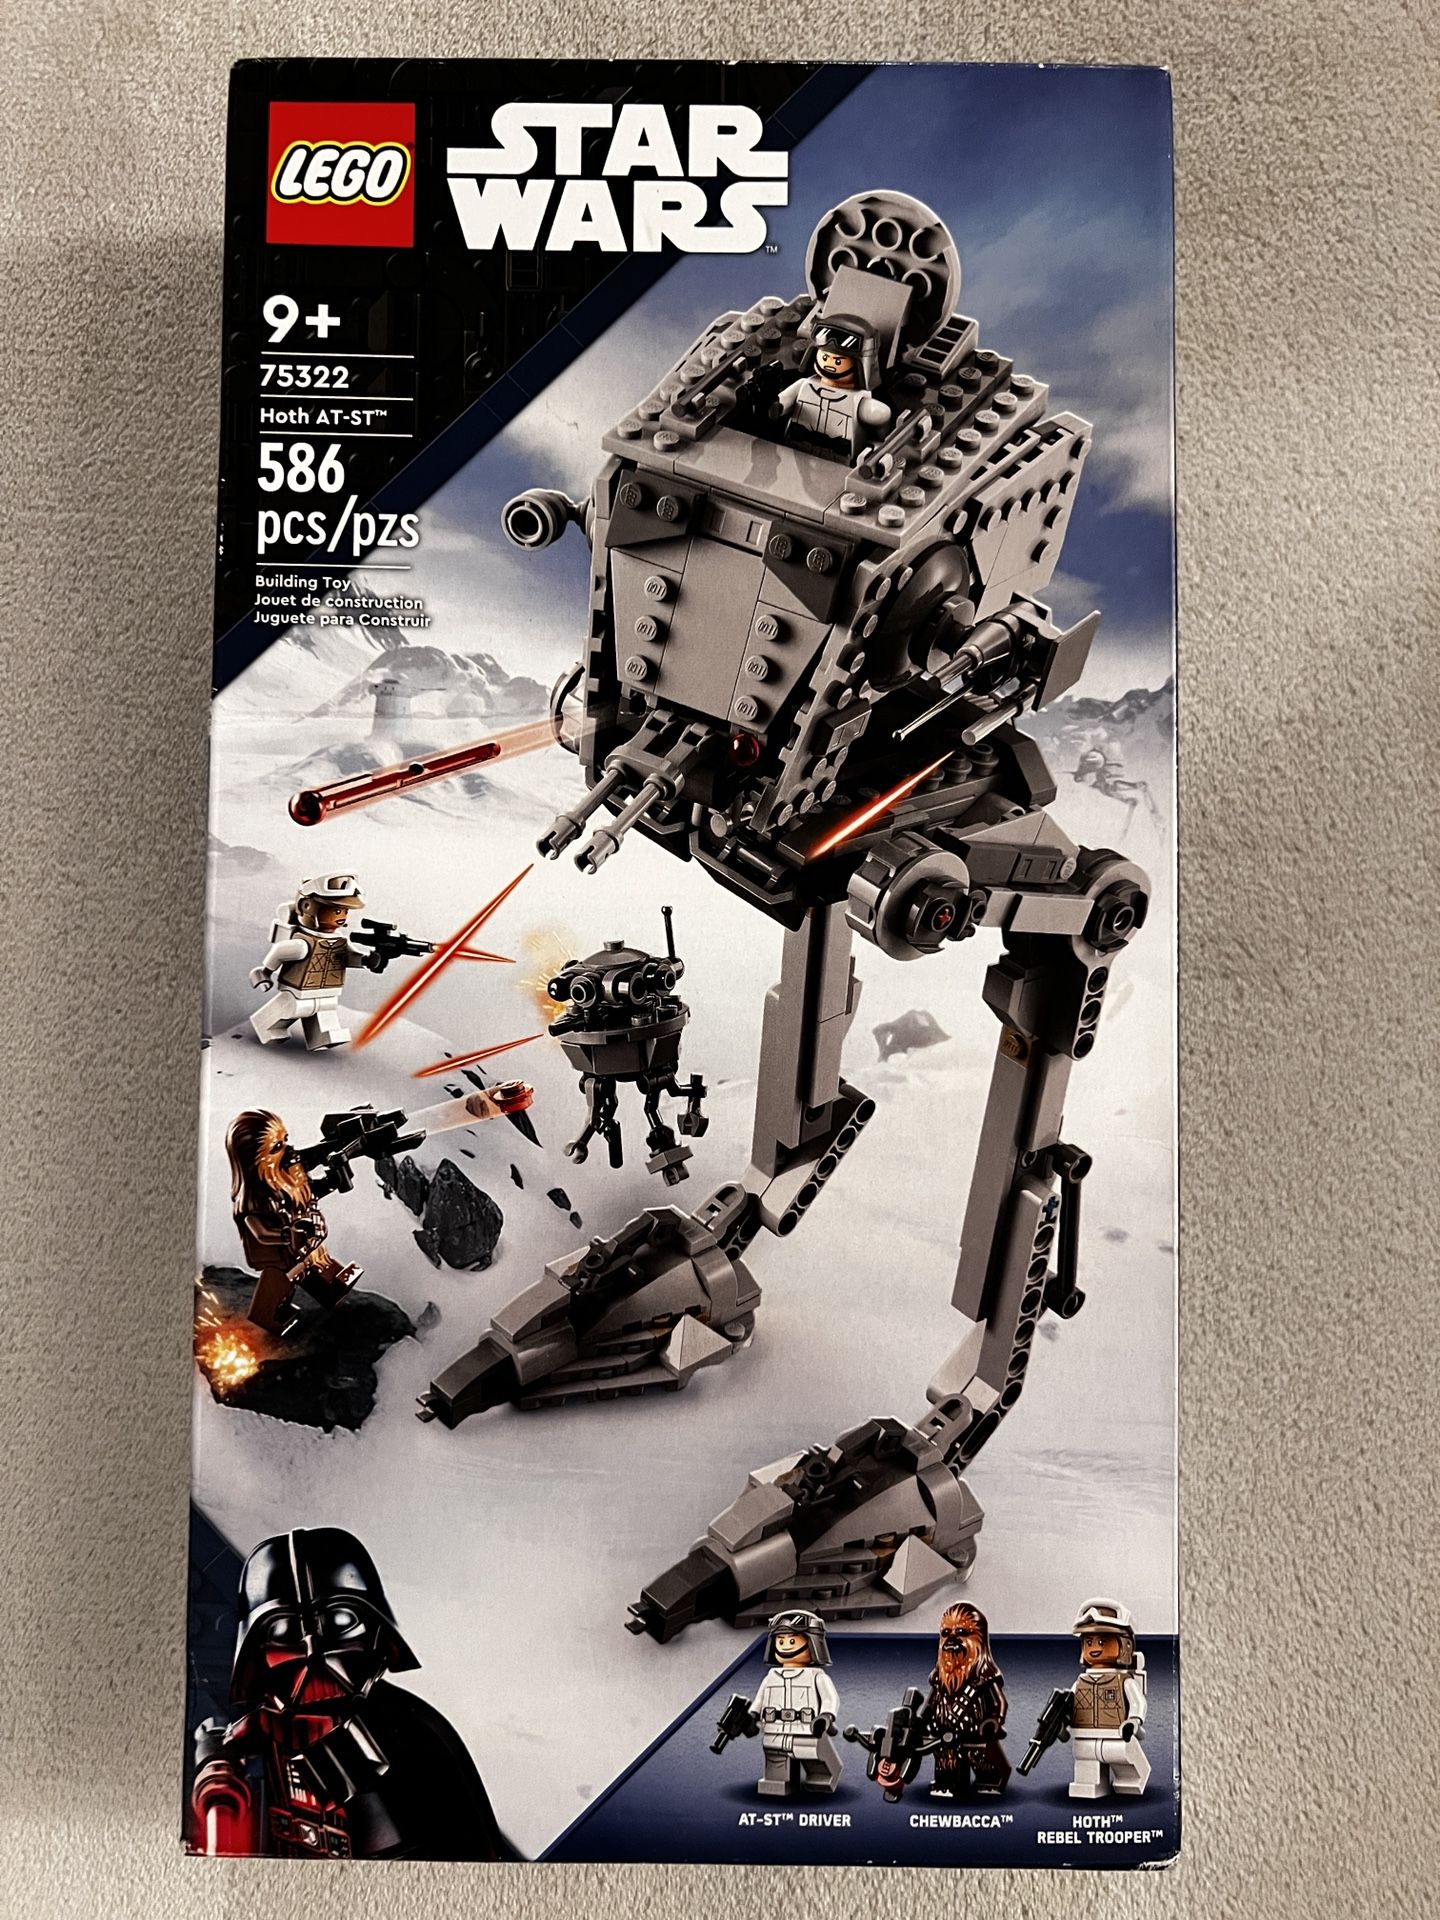 Lego Star Wars NEW (MSRP $54.99) Includes 3 Minifigures!